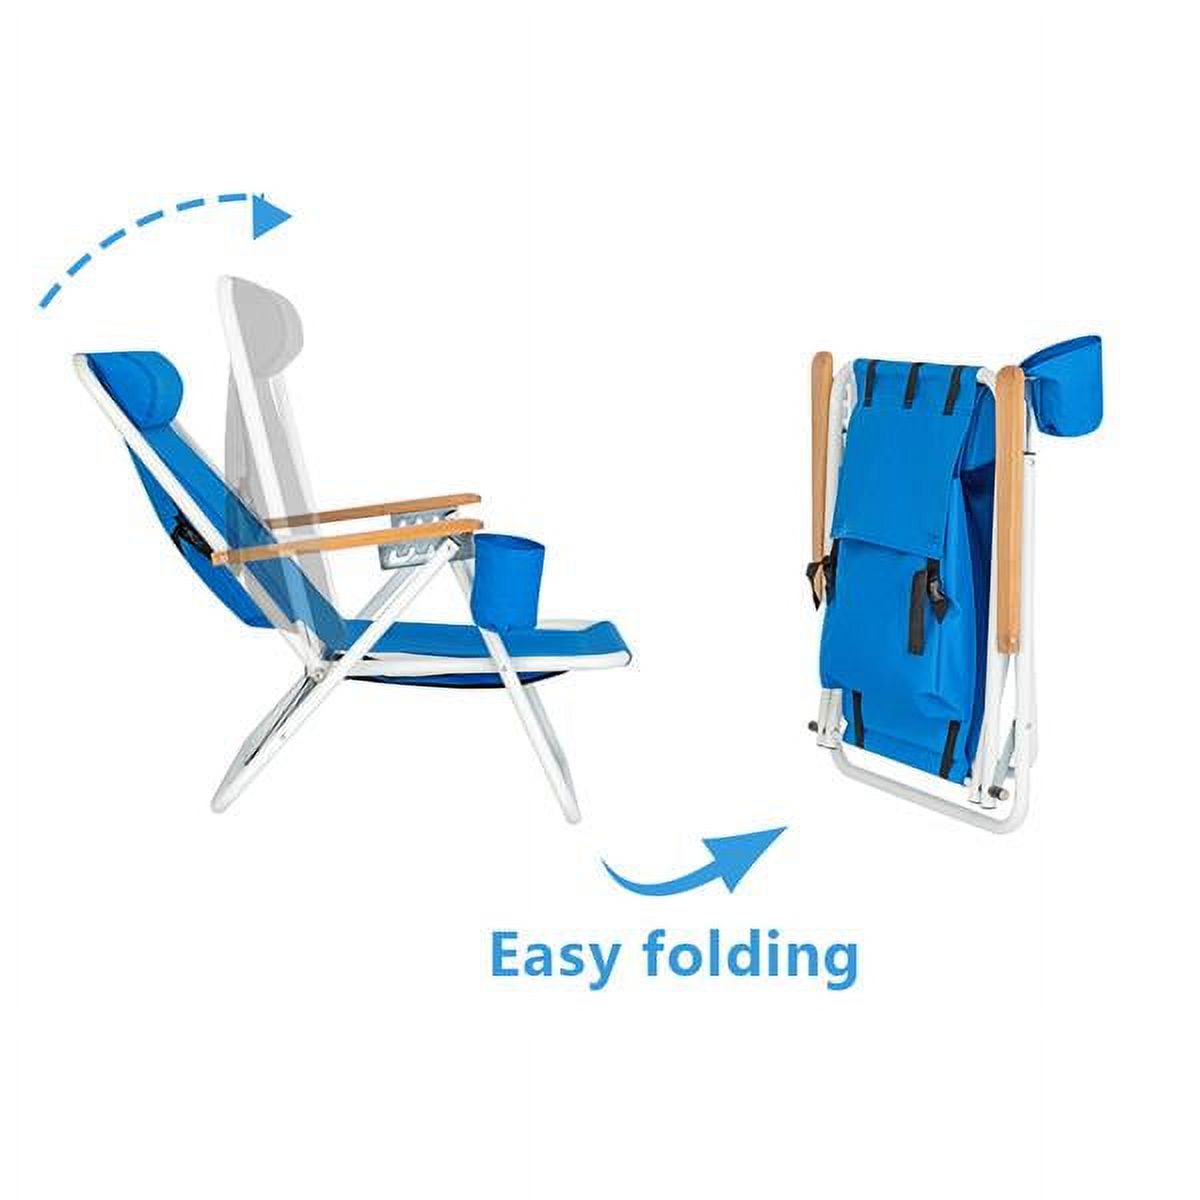 Clearance!  5 PCAKS Folding Lounge Chair,Portable High Beach Chair,Patio Folding Lightweight Camping Chair, Outdoor Garden Park Pool Side Lounge Chair, with Cup Holder, Adjustable Headrest, Blue - image 4 of 7